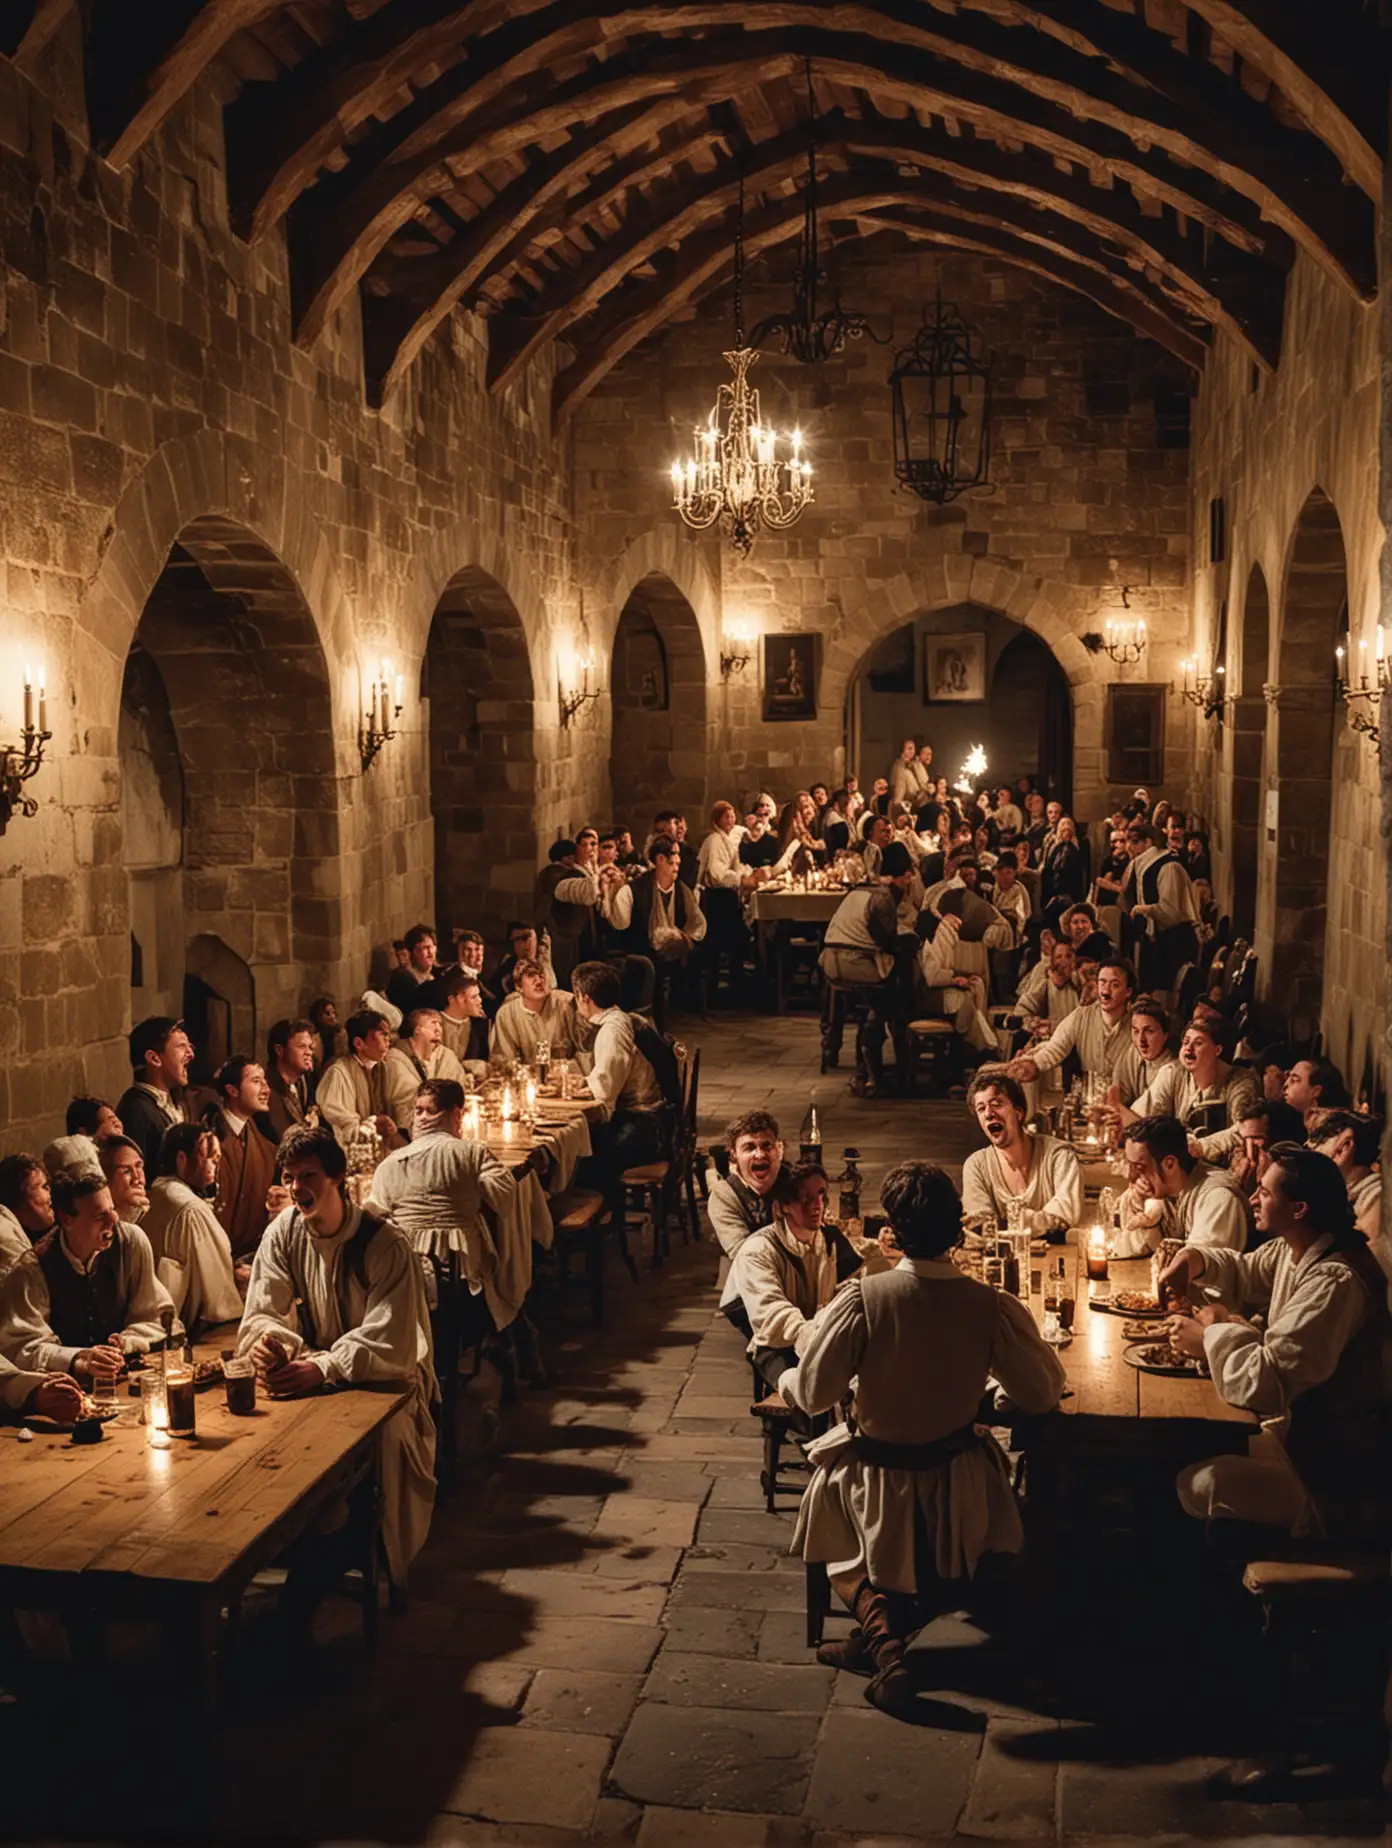 A hall in a 17th century castle, with young men sitting on tables and drinking, dressed with light clothing, boots, shouting, joyful and happy atmosphere, at night.